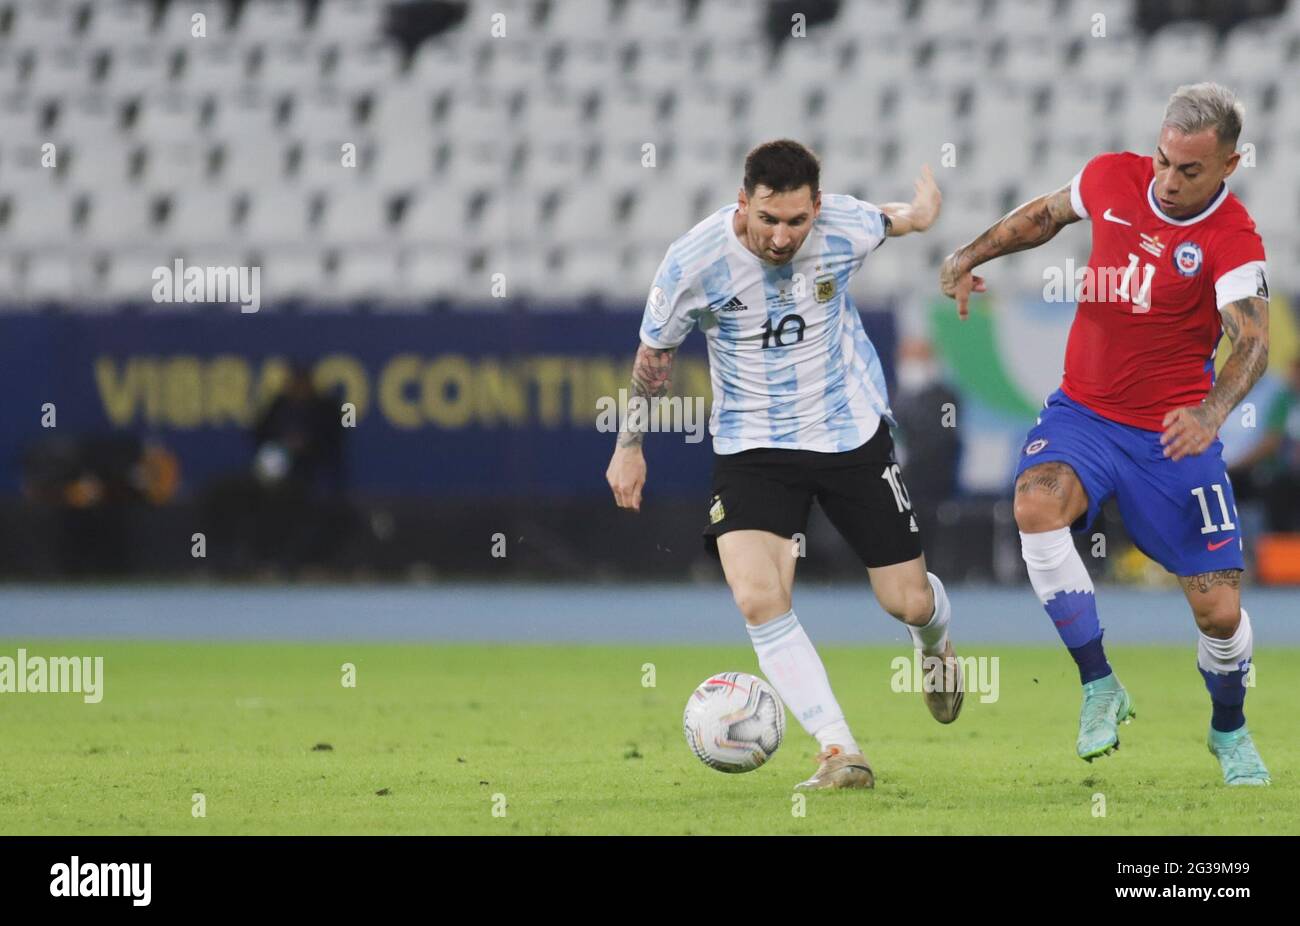 Rio De Janeiro, Brazil. 14th June, 2021. Lionel Messi (L) of Argentina vies with Eduardo Vargas of Chile during the Group A match between Argentina and Chile at the 2021 Copa America in Brasilia, Brazil, June 14, 2021. Credit: Rahel Patrasso/Xinhua/Alamy Live News Stock Photo